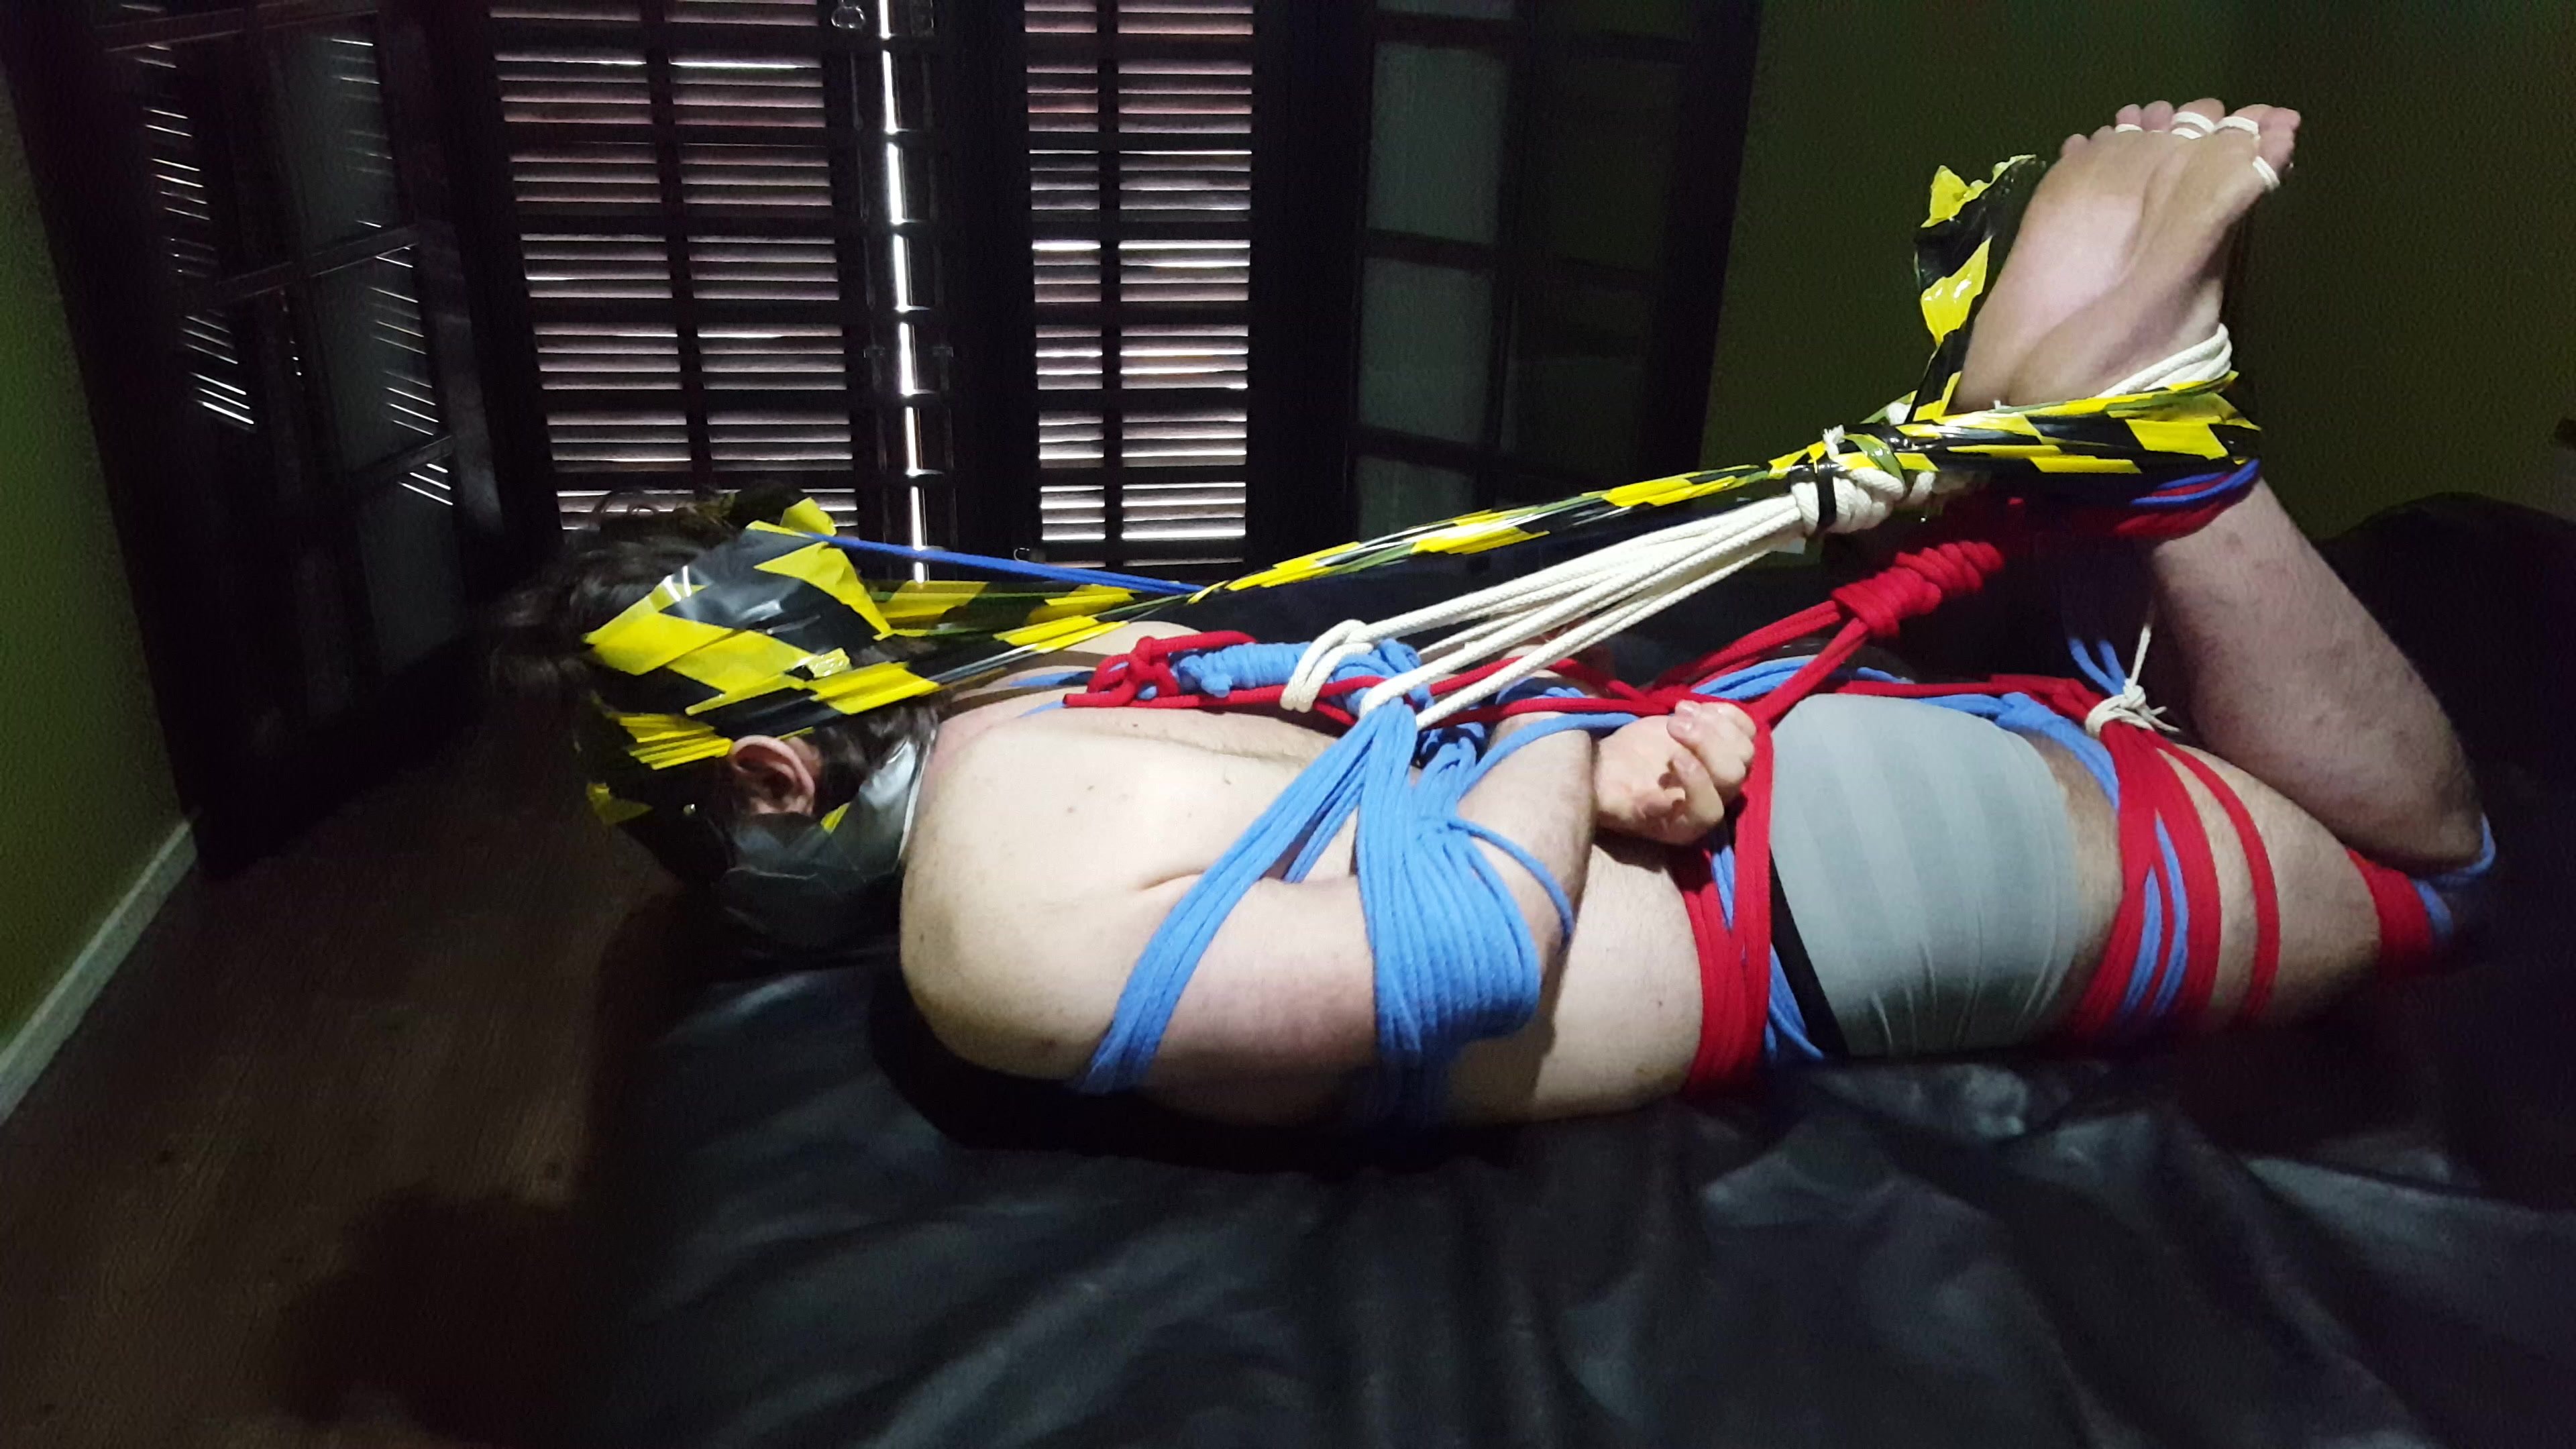 Tightly hogtied part two